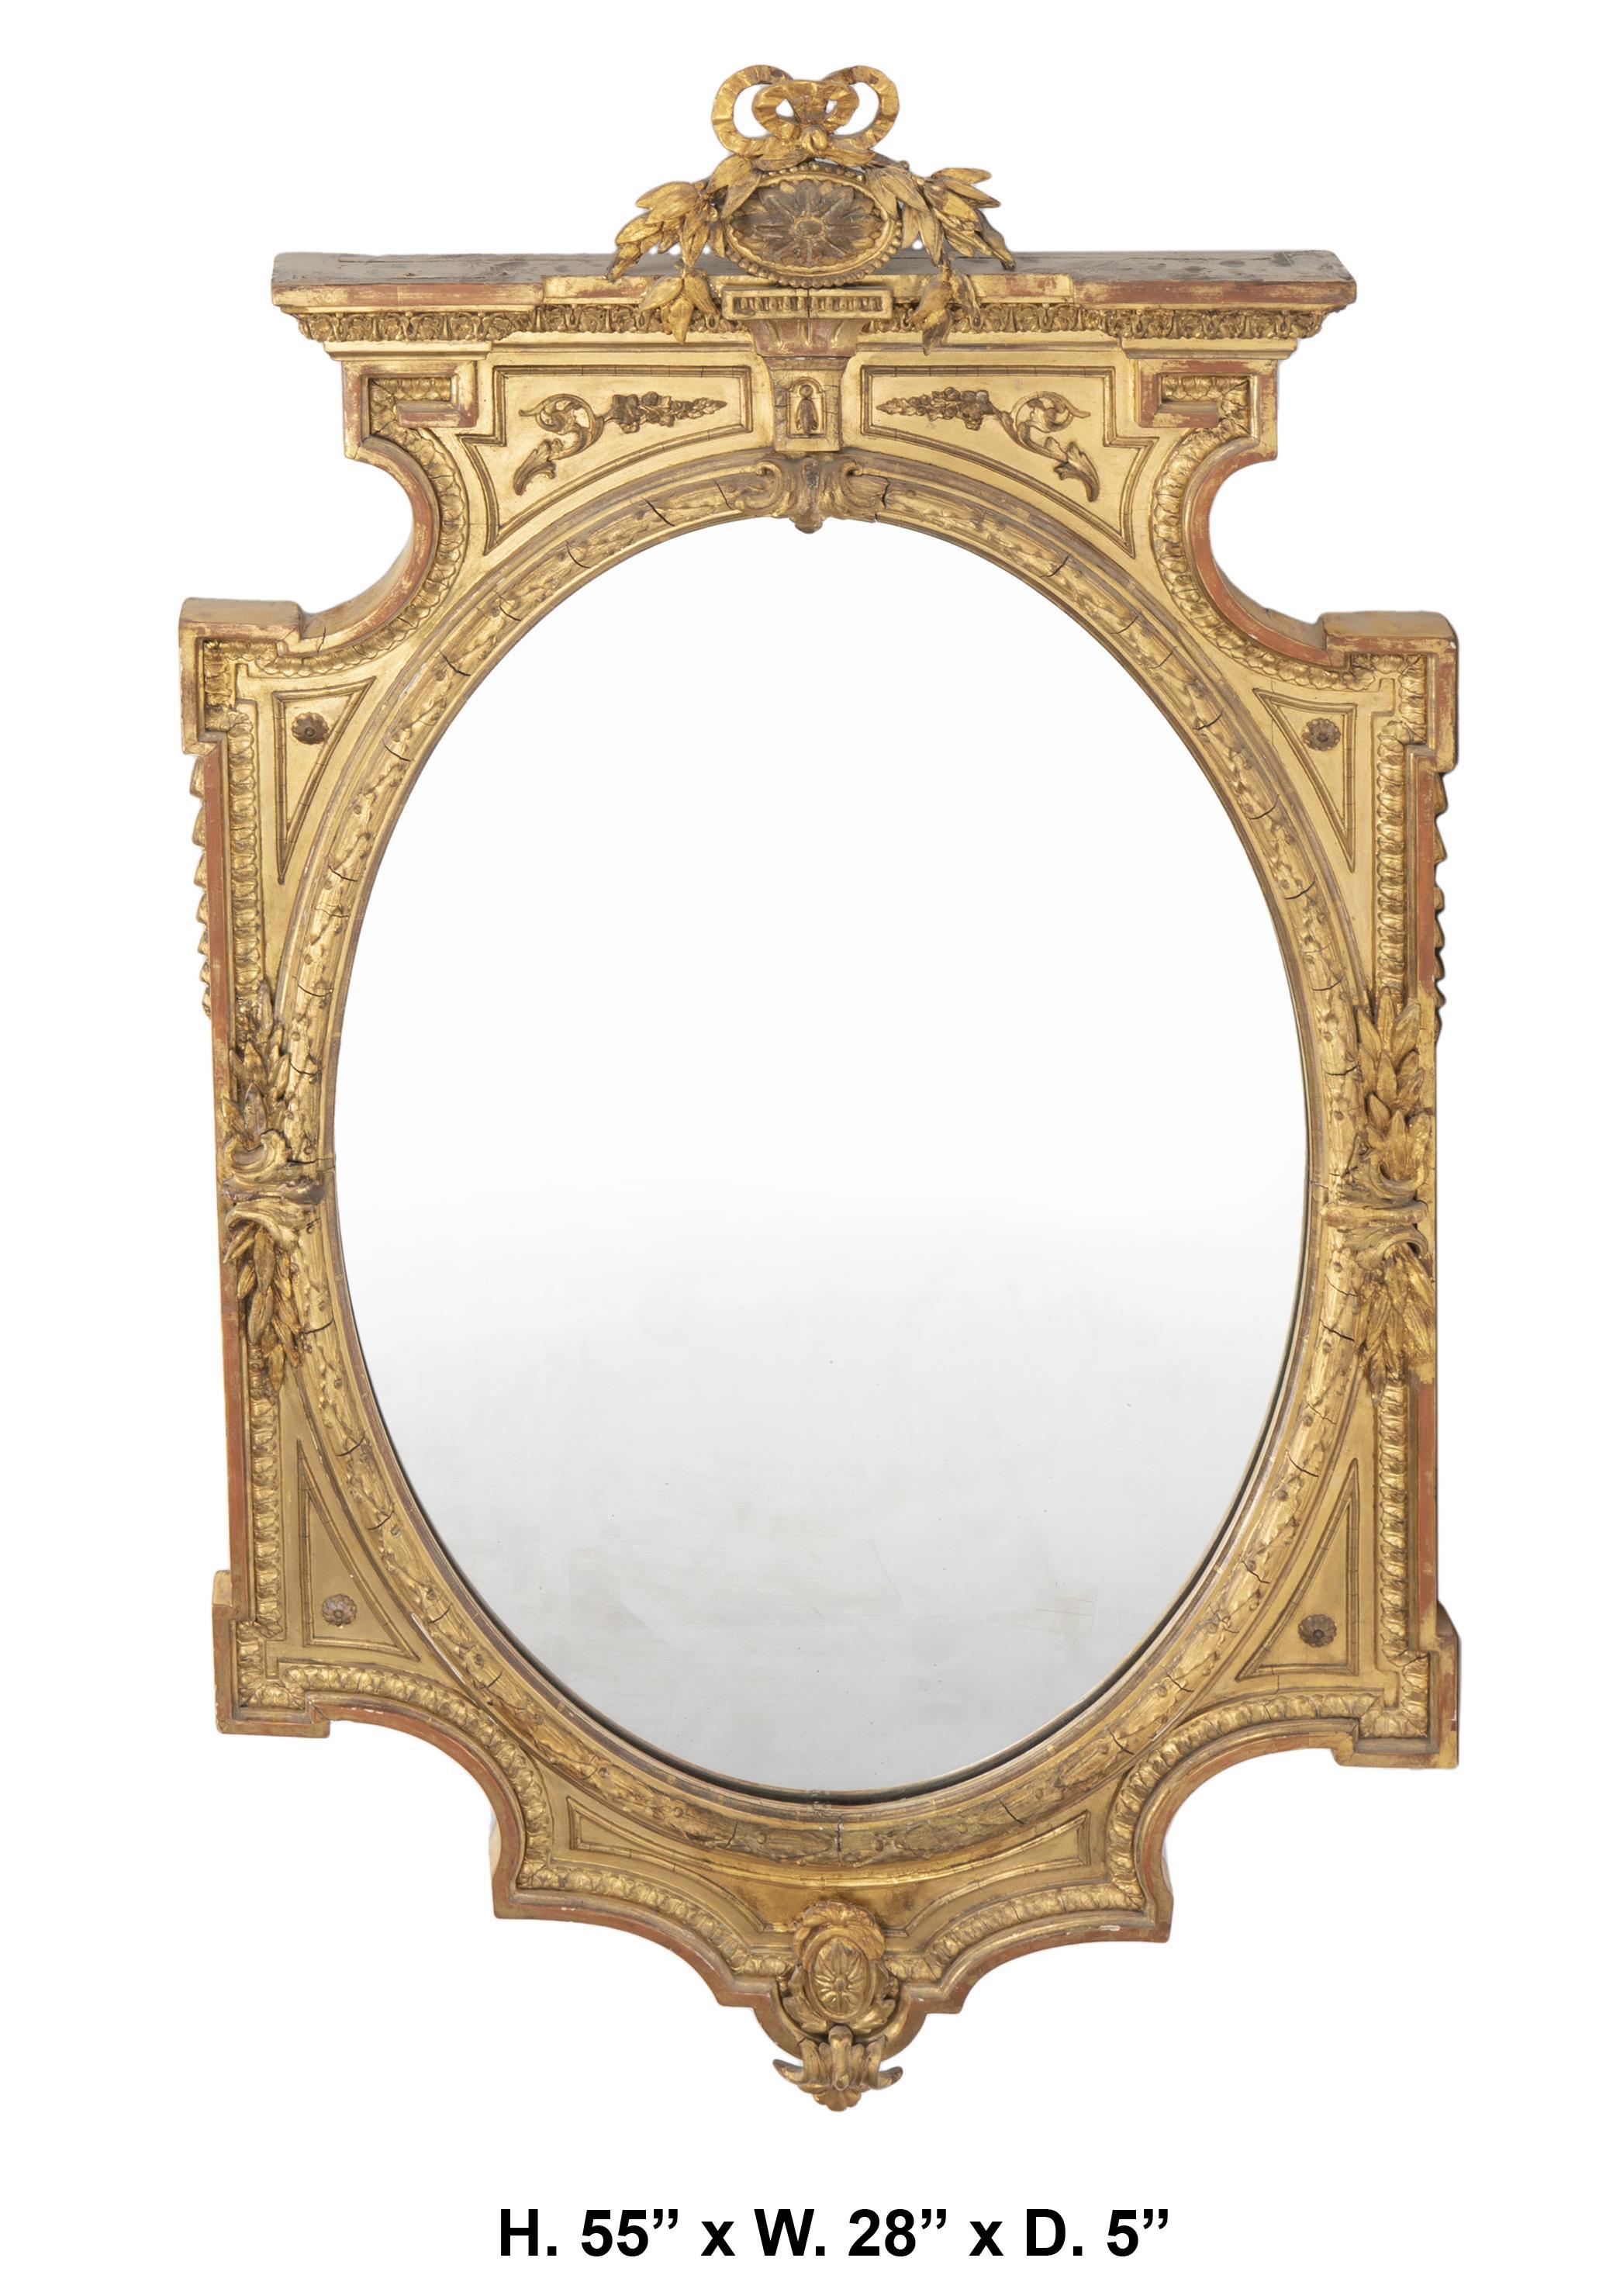 Uniquely shaped 19 century Italian neo-classical style gilt wood and gesso mirror.
The carved cornice with a floral medallion topped with ribbon details atop a carved elaborate frame adorned with applied composition moldings and foliate designs